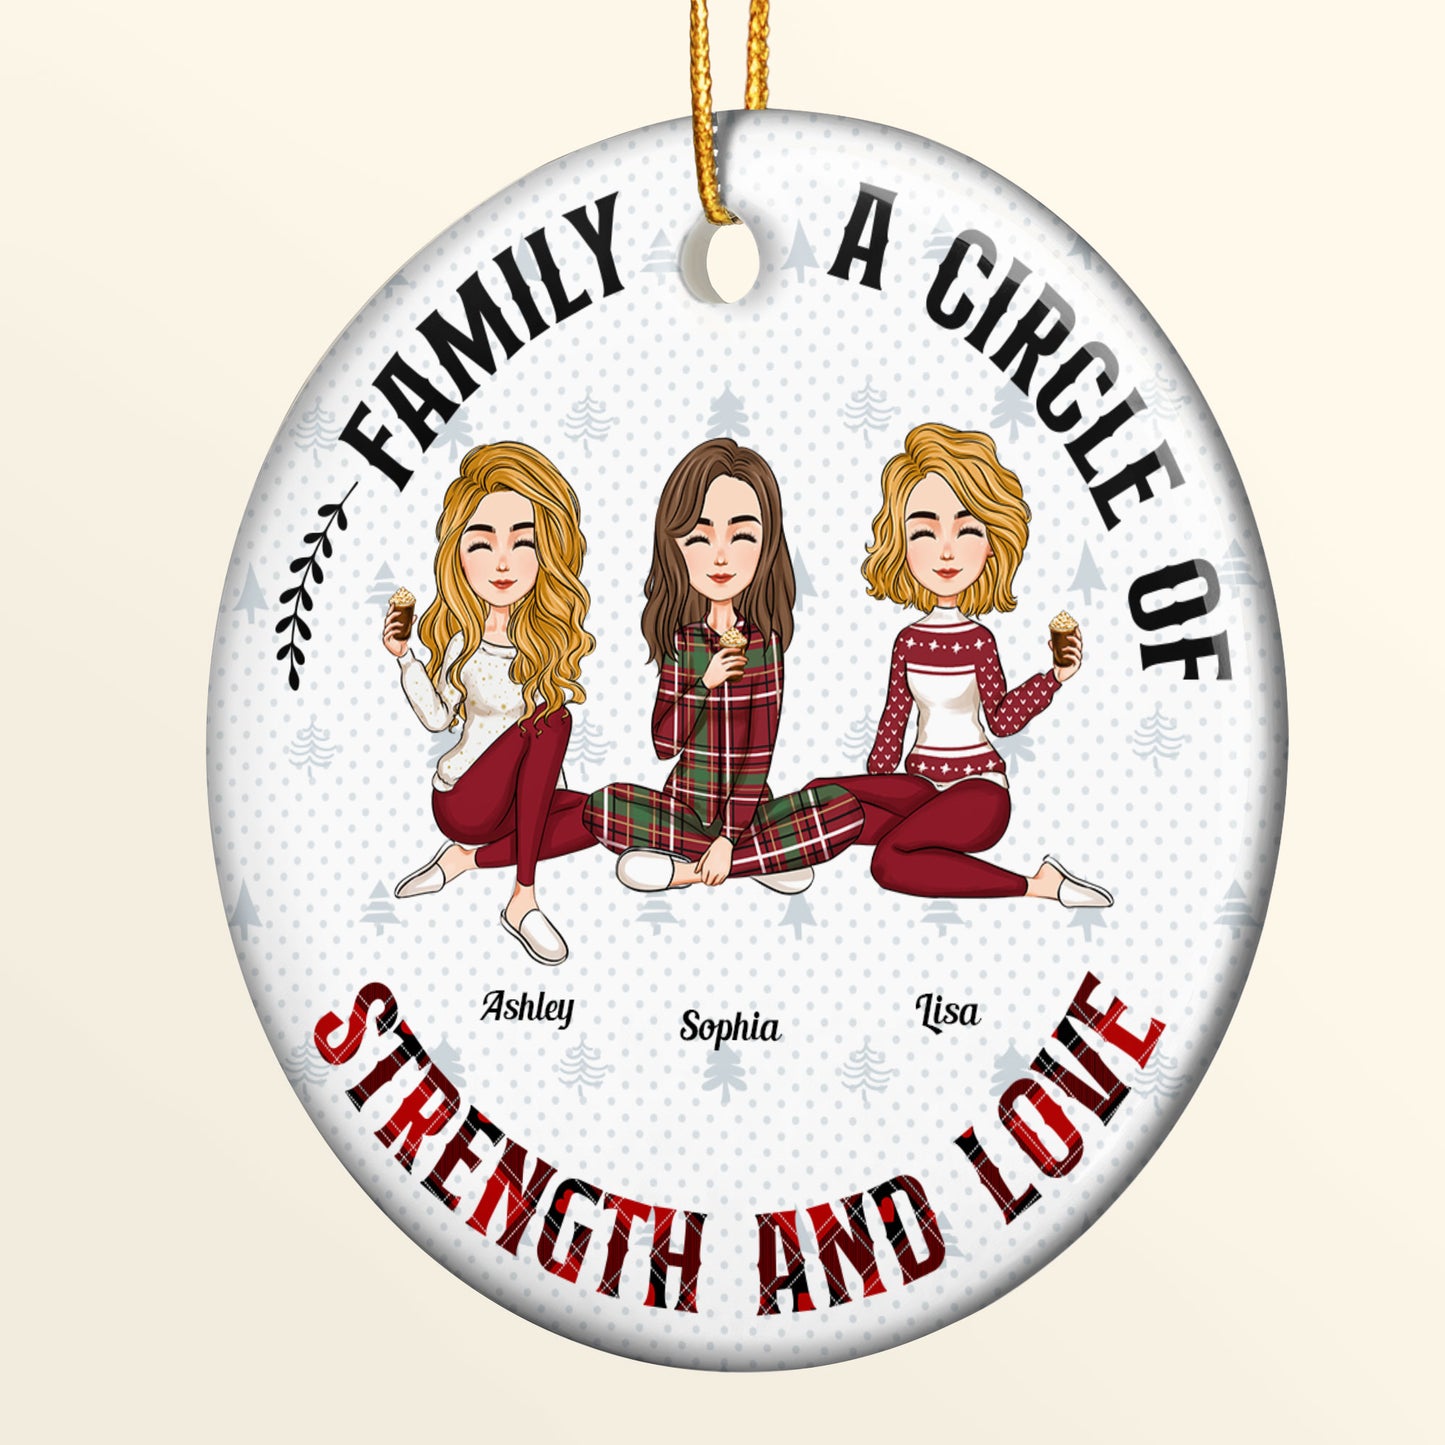 A Circle Of Strength And Love - Personalized Ceramic Ornament